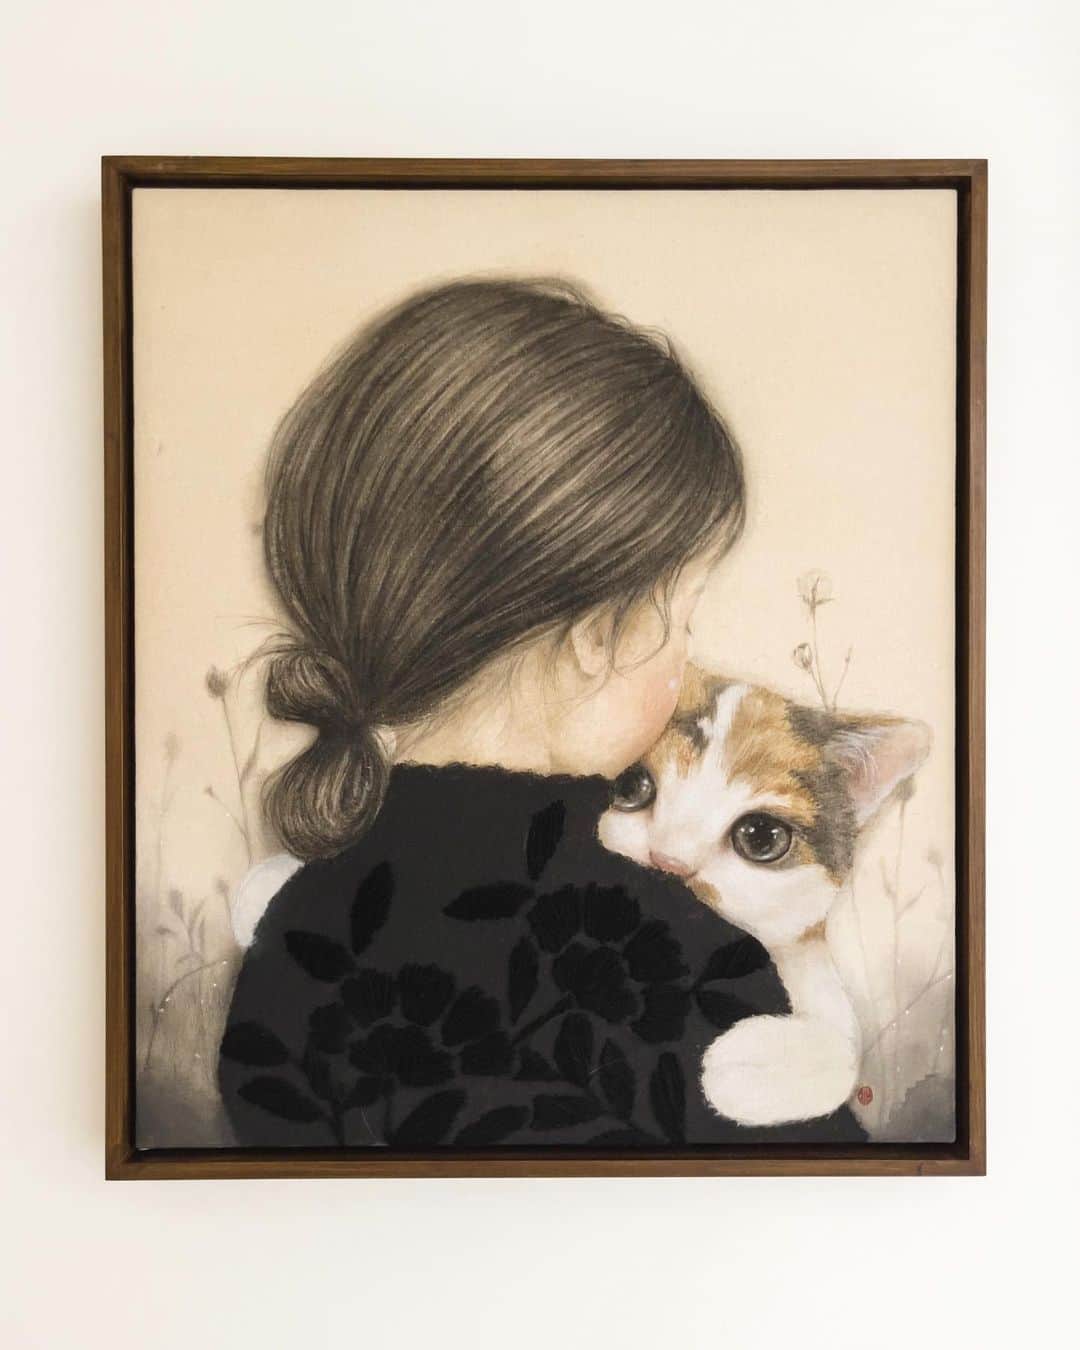 Ruby Kwanのインスタグラム：「New member for my home gallery wall from @affordableartfairhk. Another art piece with cat from @p.jihea, now side by side with @catmasutra. 😻❤️😸  Hug by Jihea Park Ink, Gouache & Embroidery on linen 53 × 45.5cm (2022)  #hug #jiheapark #jiheaparkart #koreanartist #affordableartfairhk #affordableart」